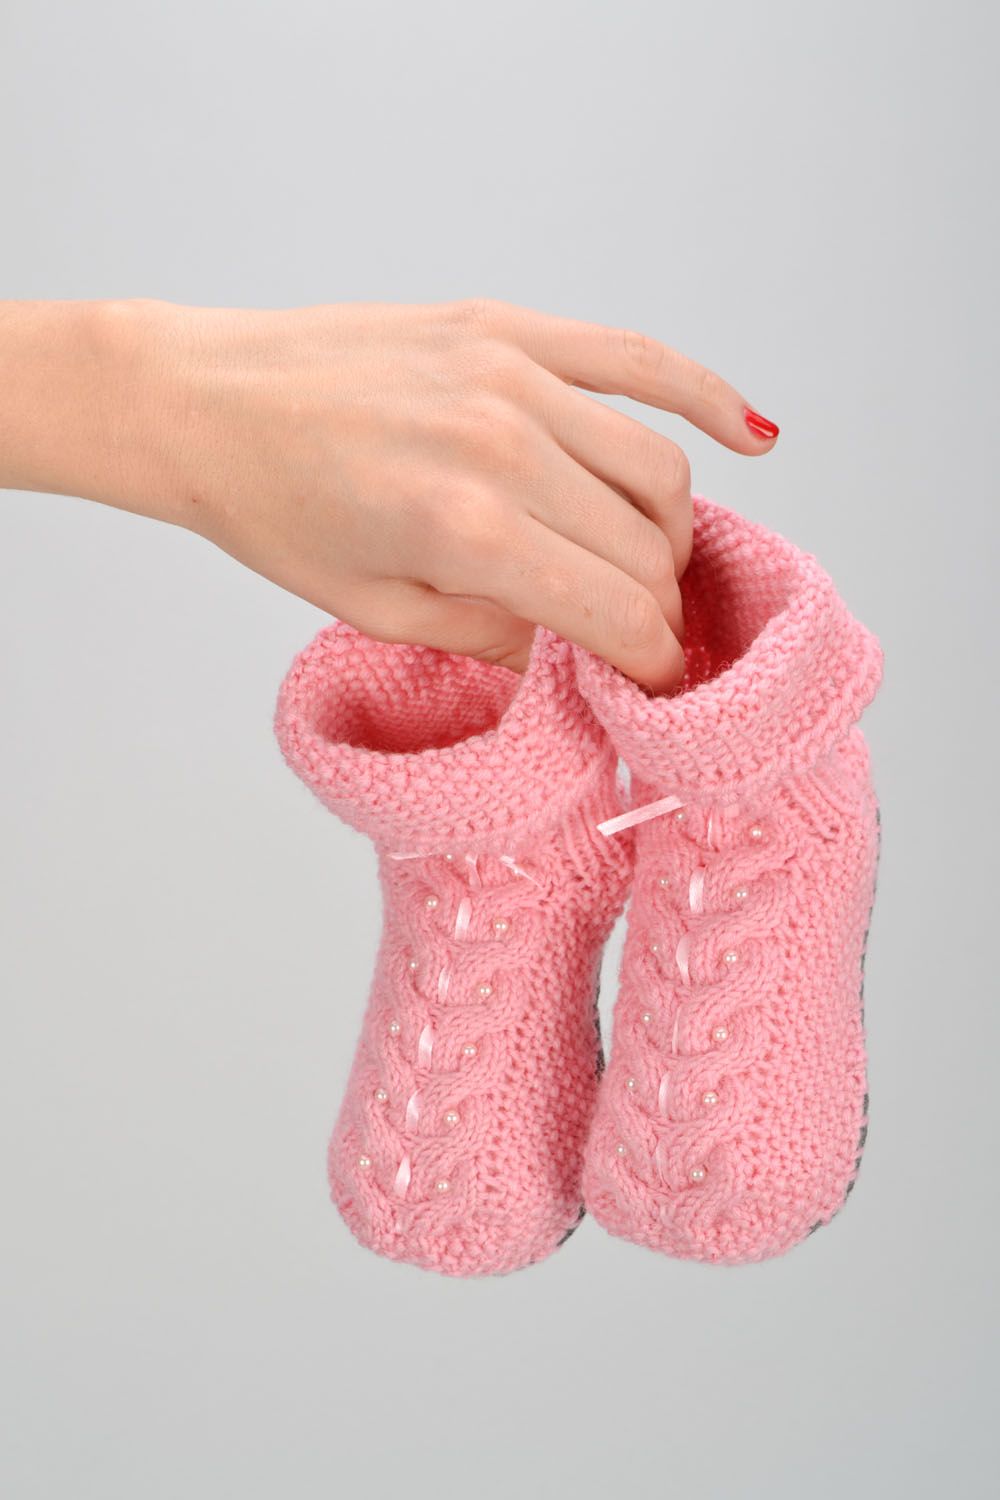 Crochet baby shoes photo 2